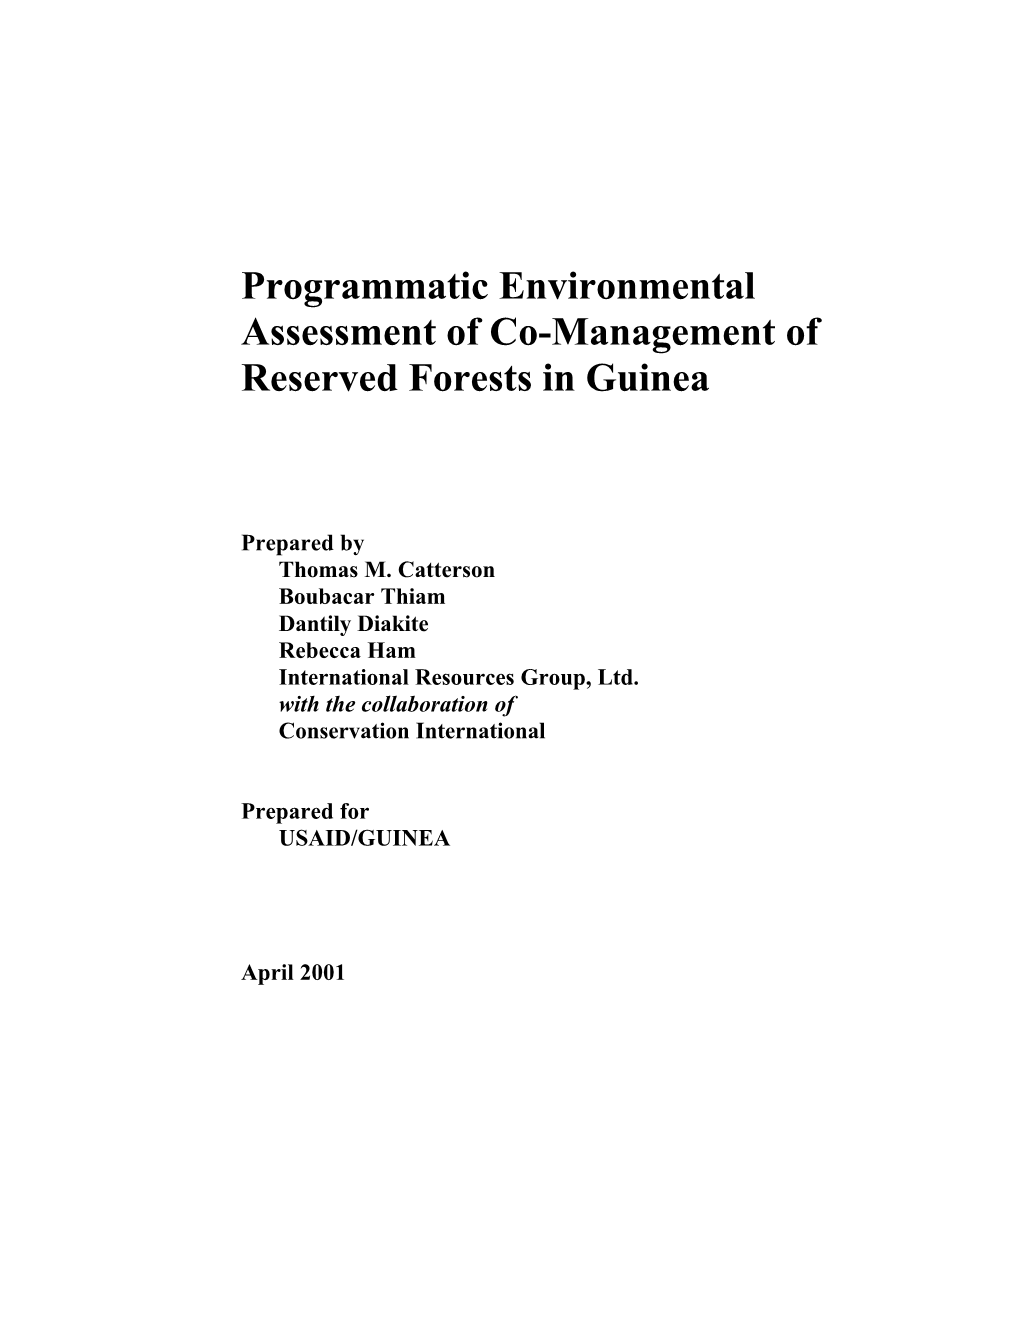 Programmatic Environmental Assessment of Co-Management of Reserved Forests in Guinea